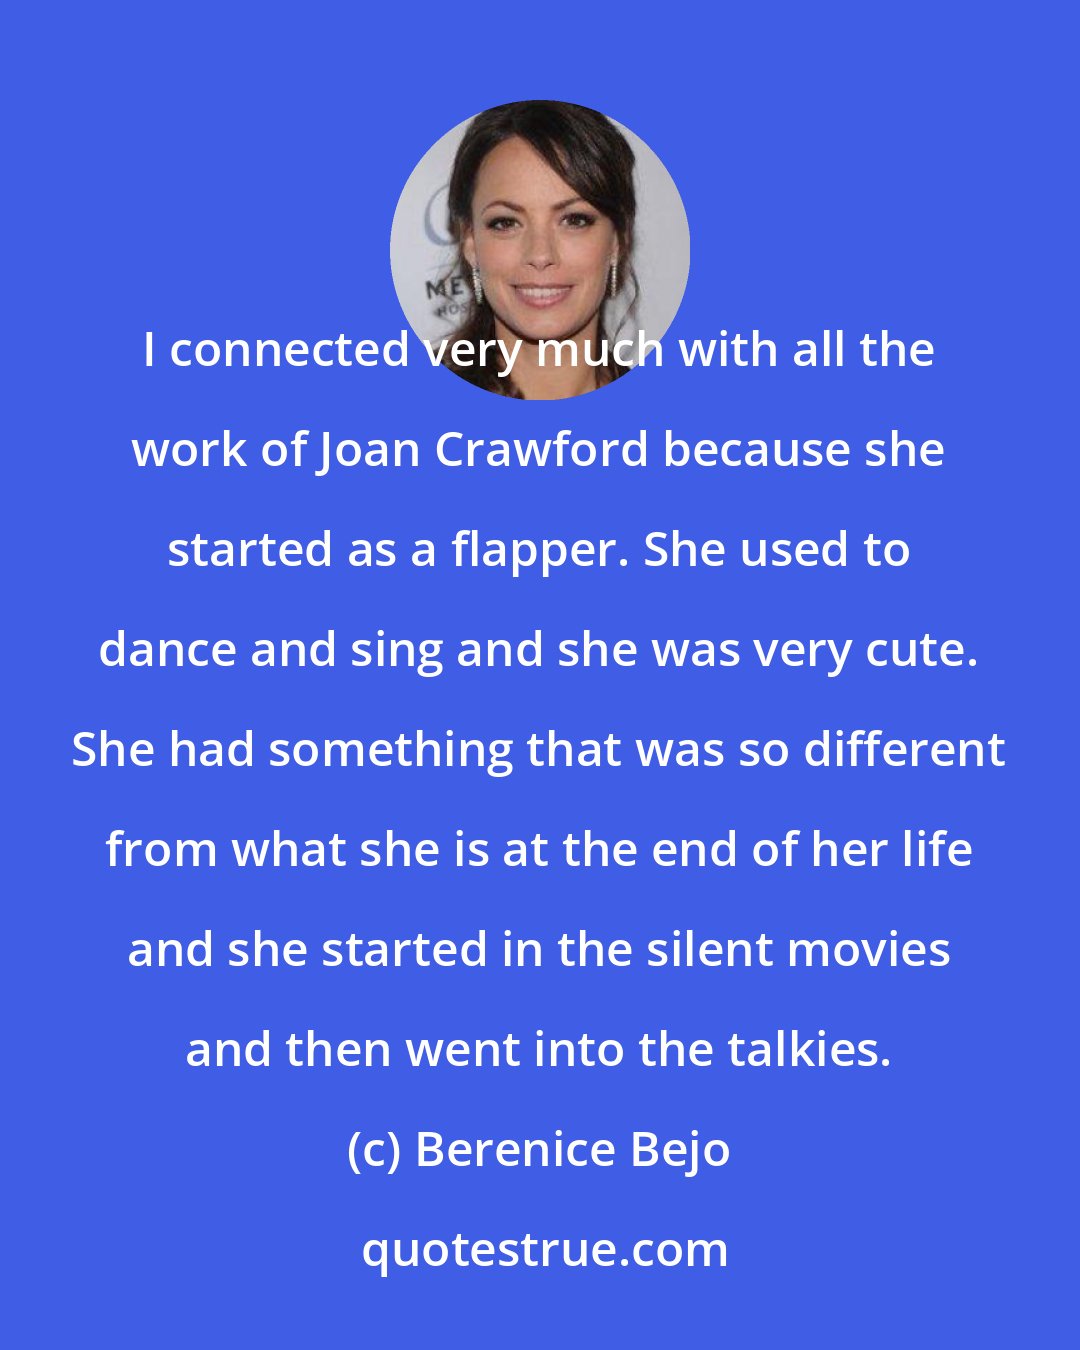 Berenice Bejo: I connected very much with all the work of Joan Crawford because she started as a flapper. She used to dance and sing and she was very cute. She had something that was so different from what she is at the end of her life and she started in the silent movies and then went into the talkies.